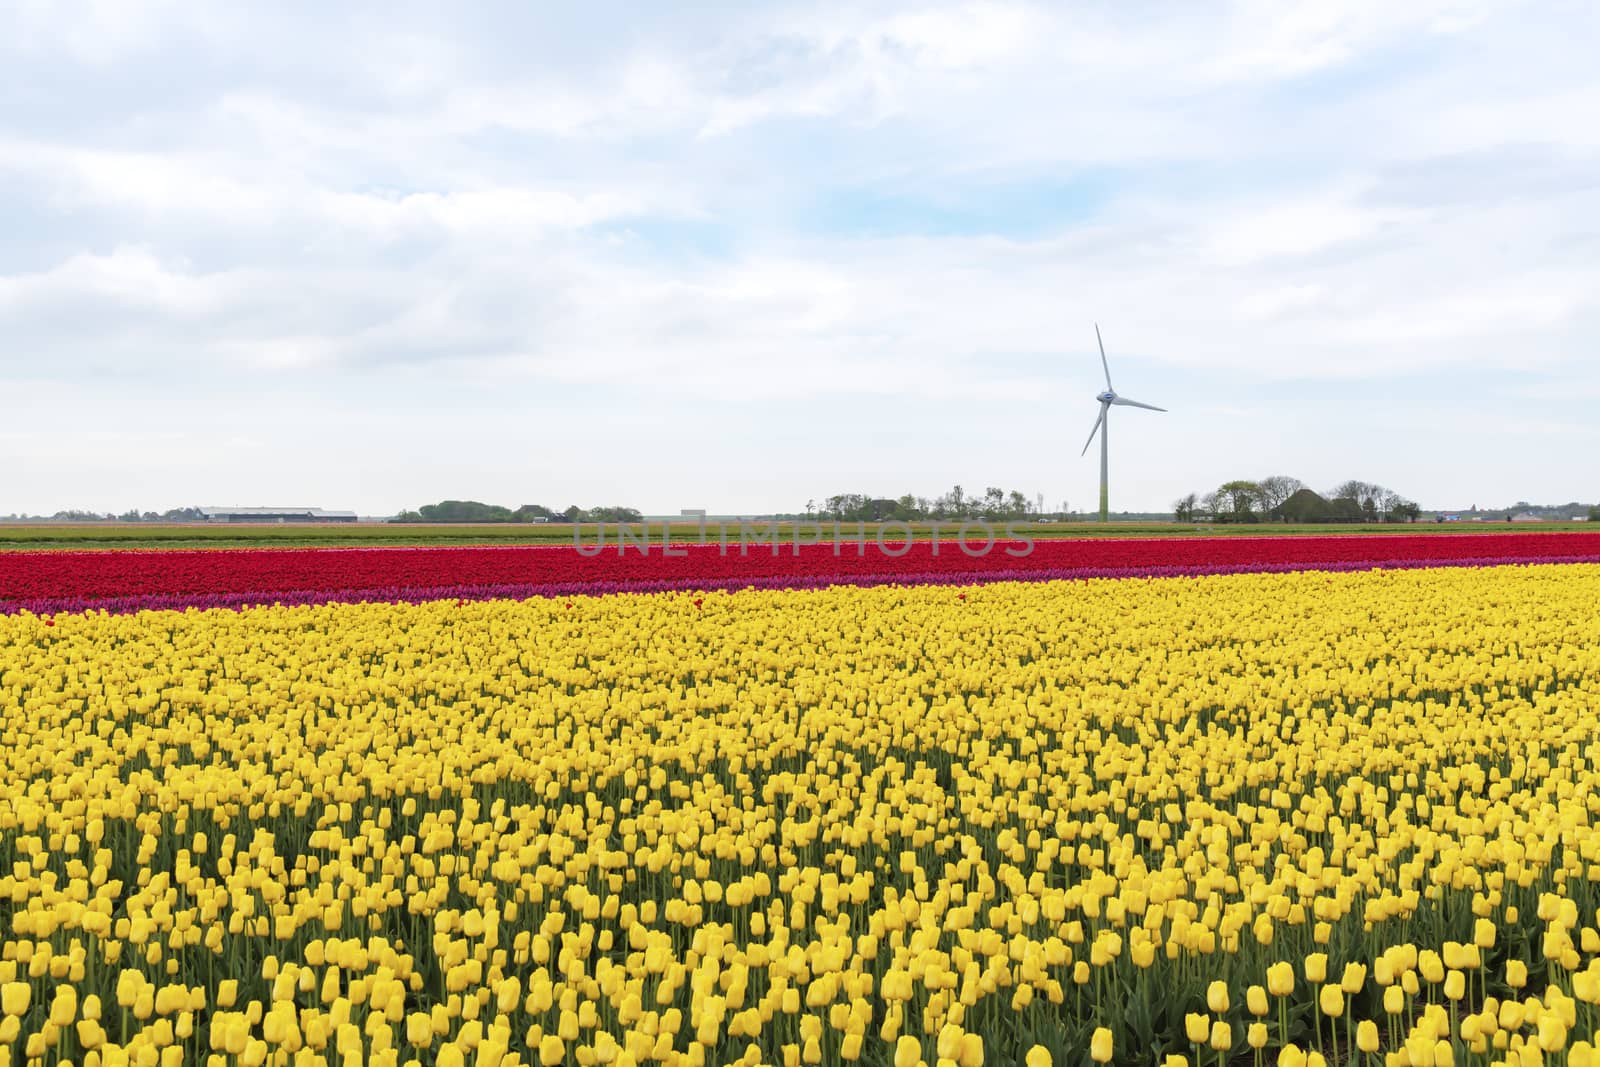 Dutch rural landscape with yellow and red tulips bulb farm field and wind turbine in the background by ankorlight